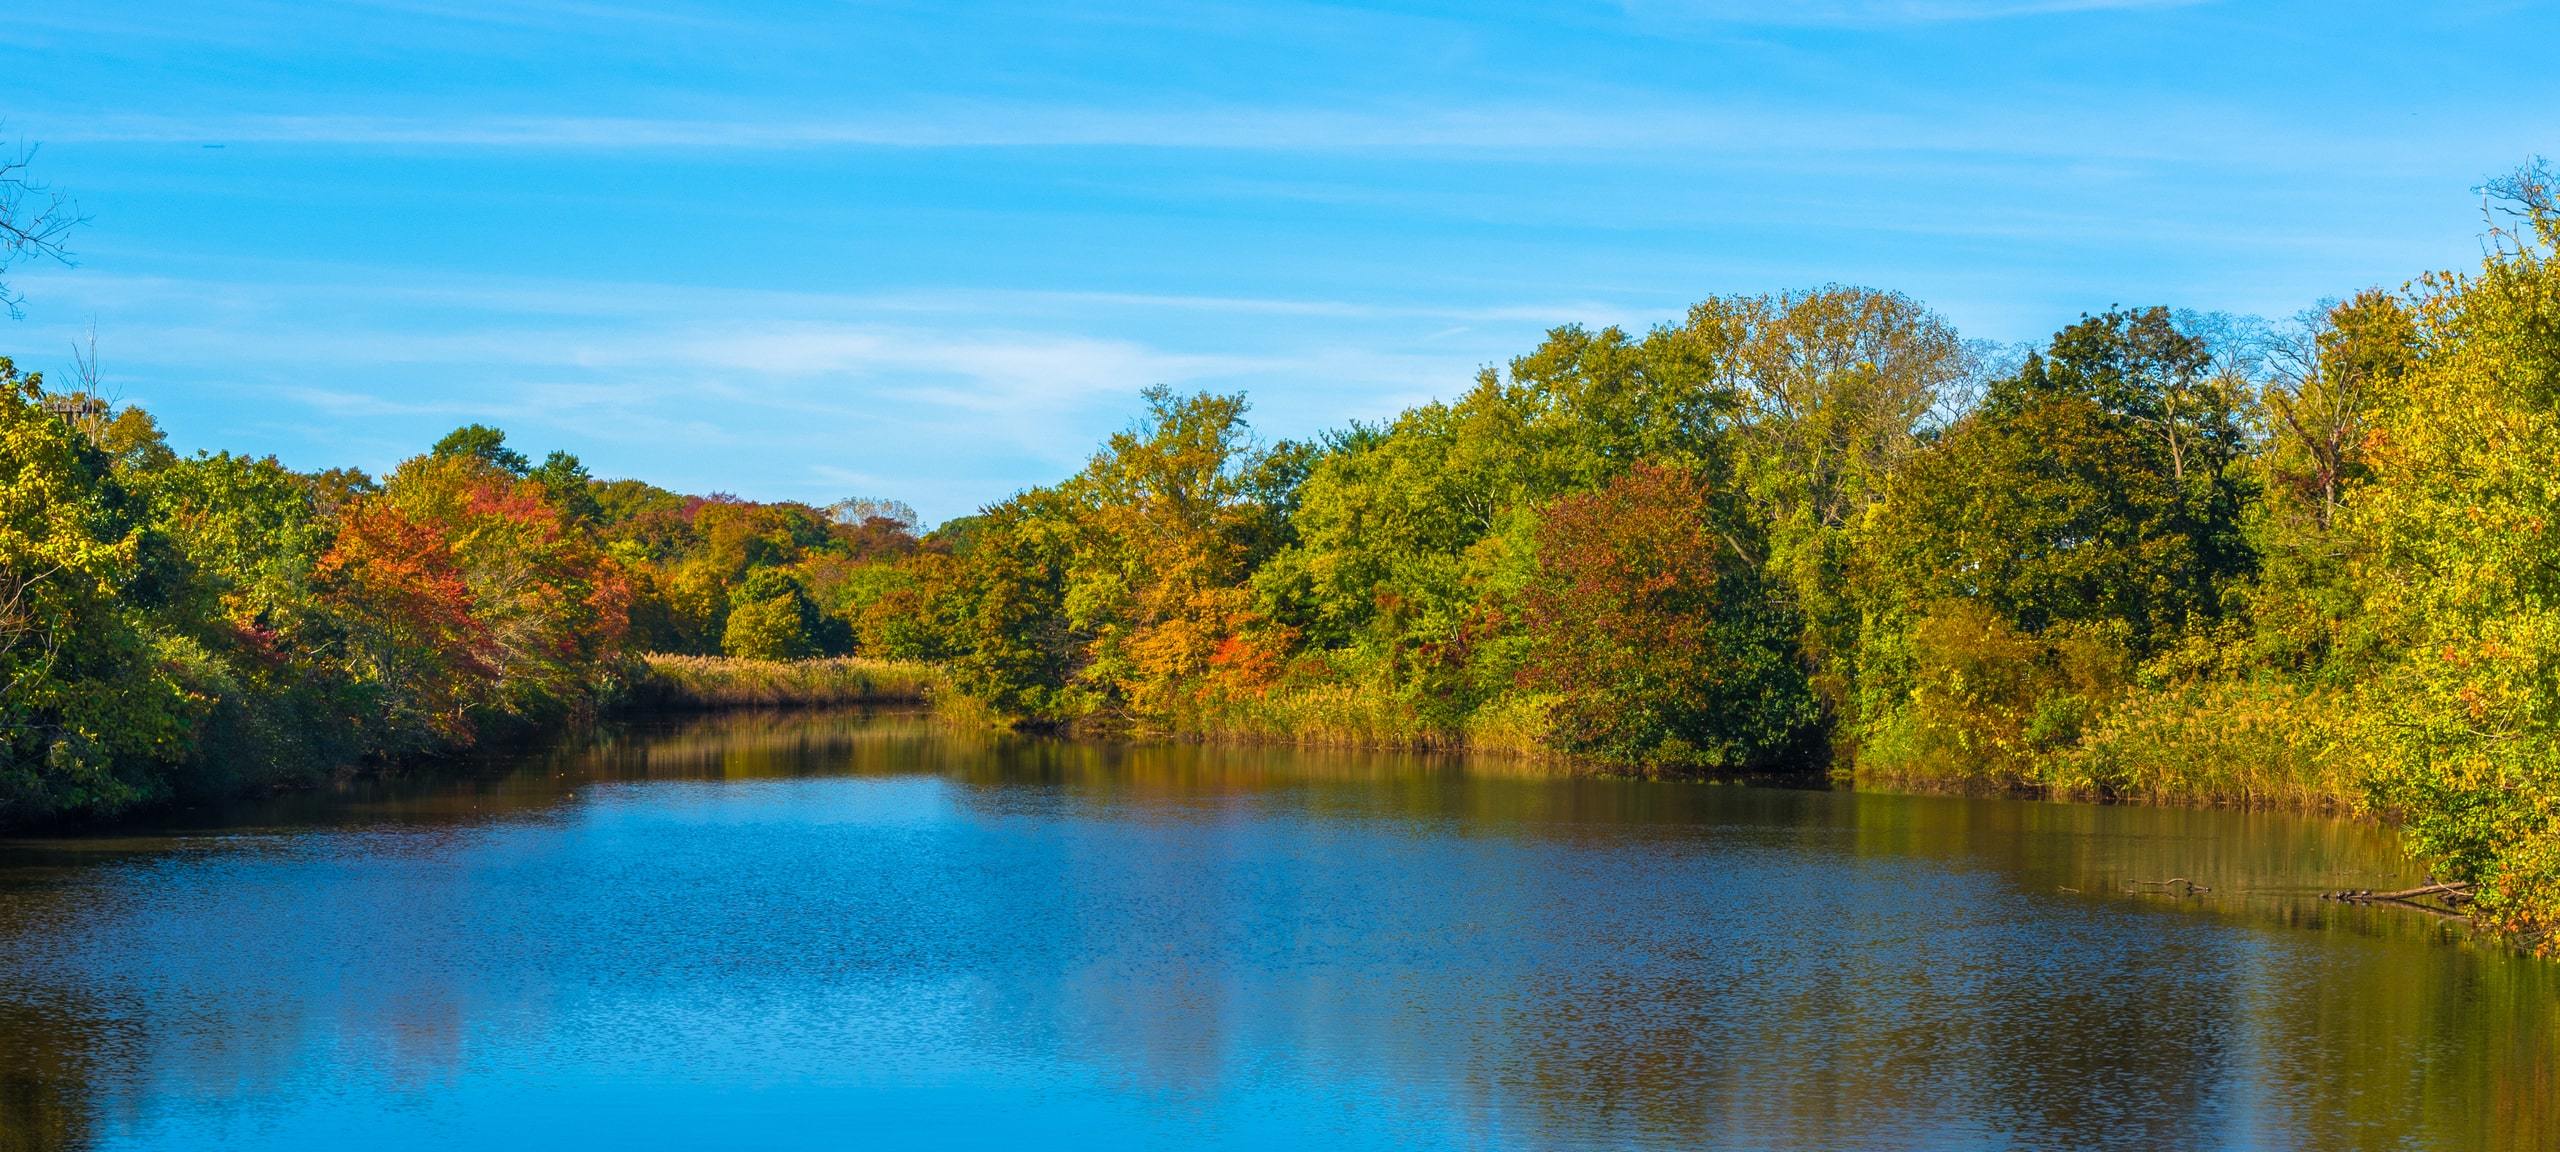 Autumn trees surrounding Wreck Pond in Spring Lake Heights, NJ